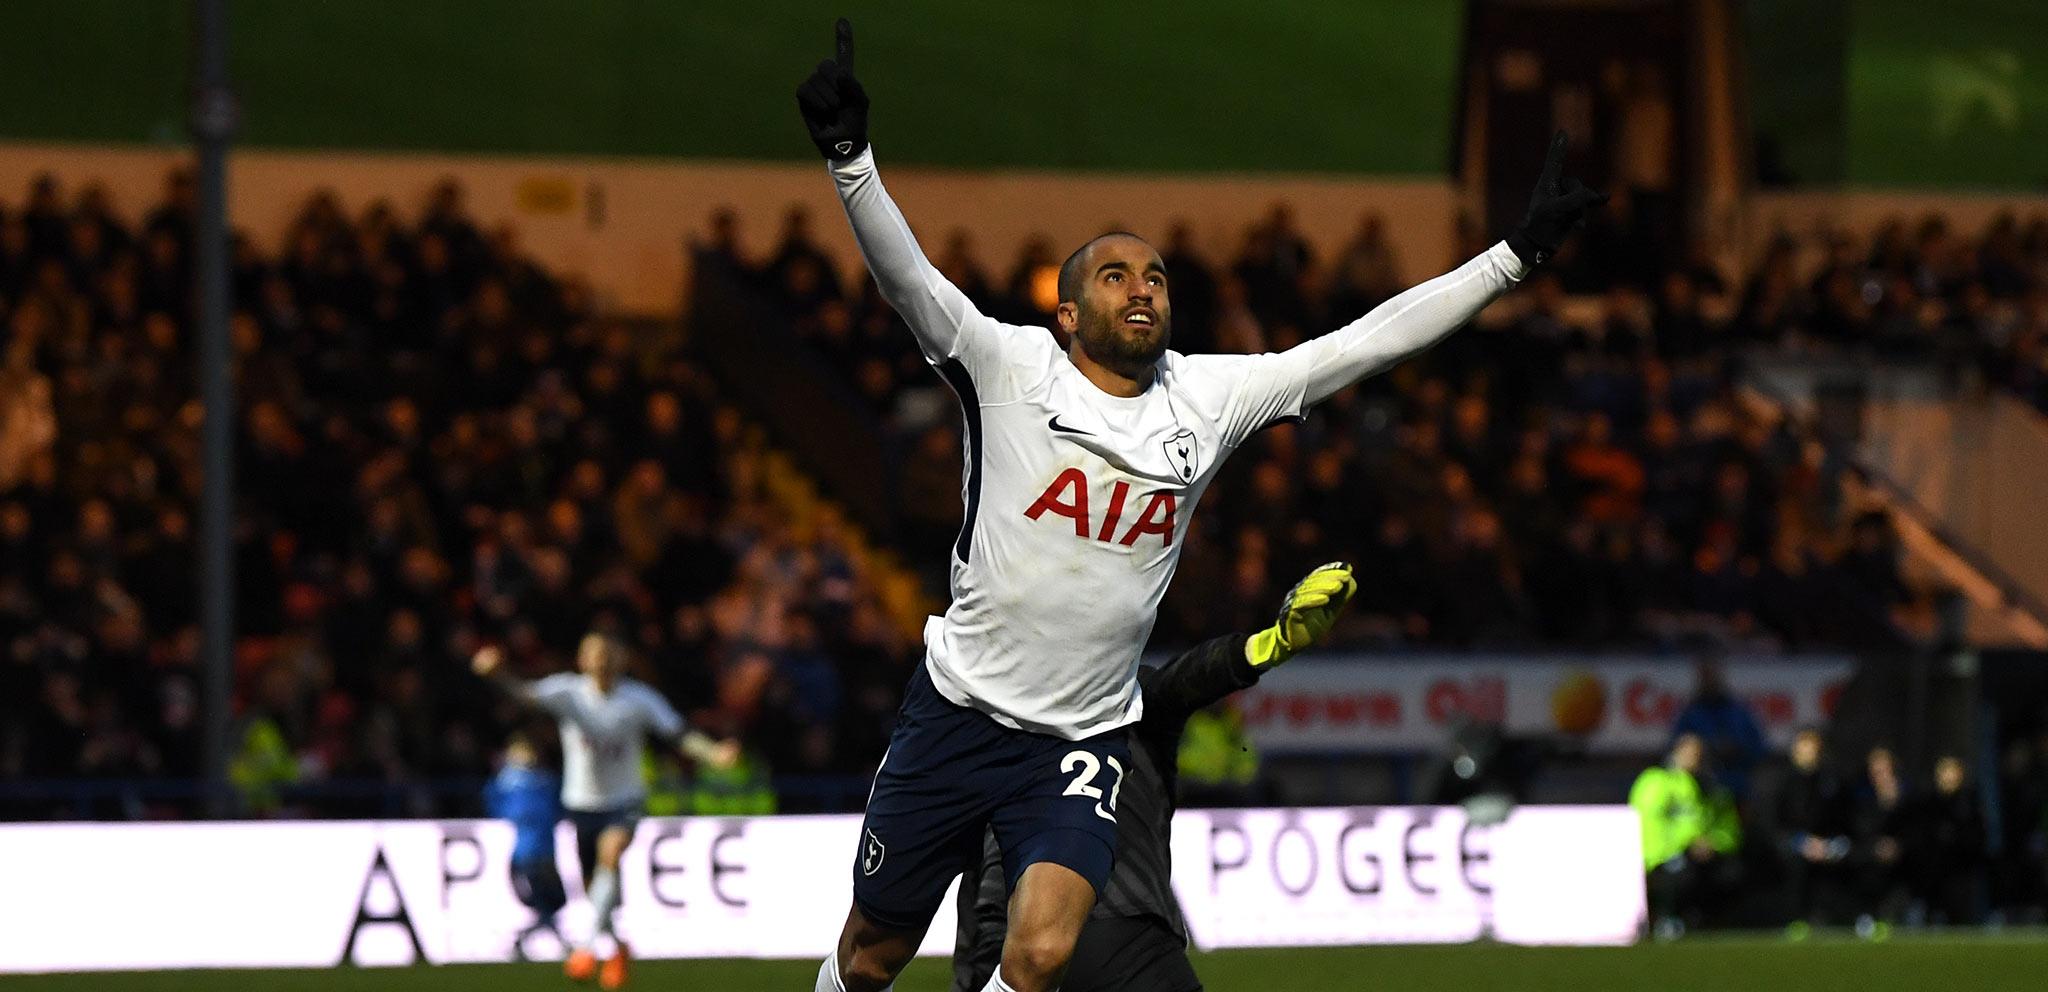 Lucas Moura Profile, Stats and News